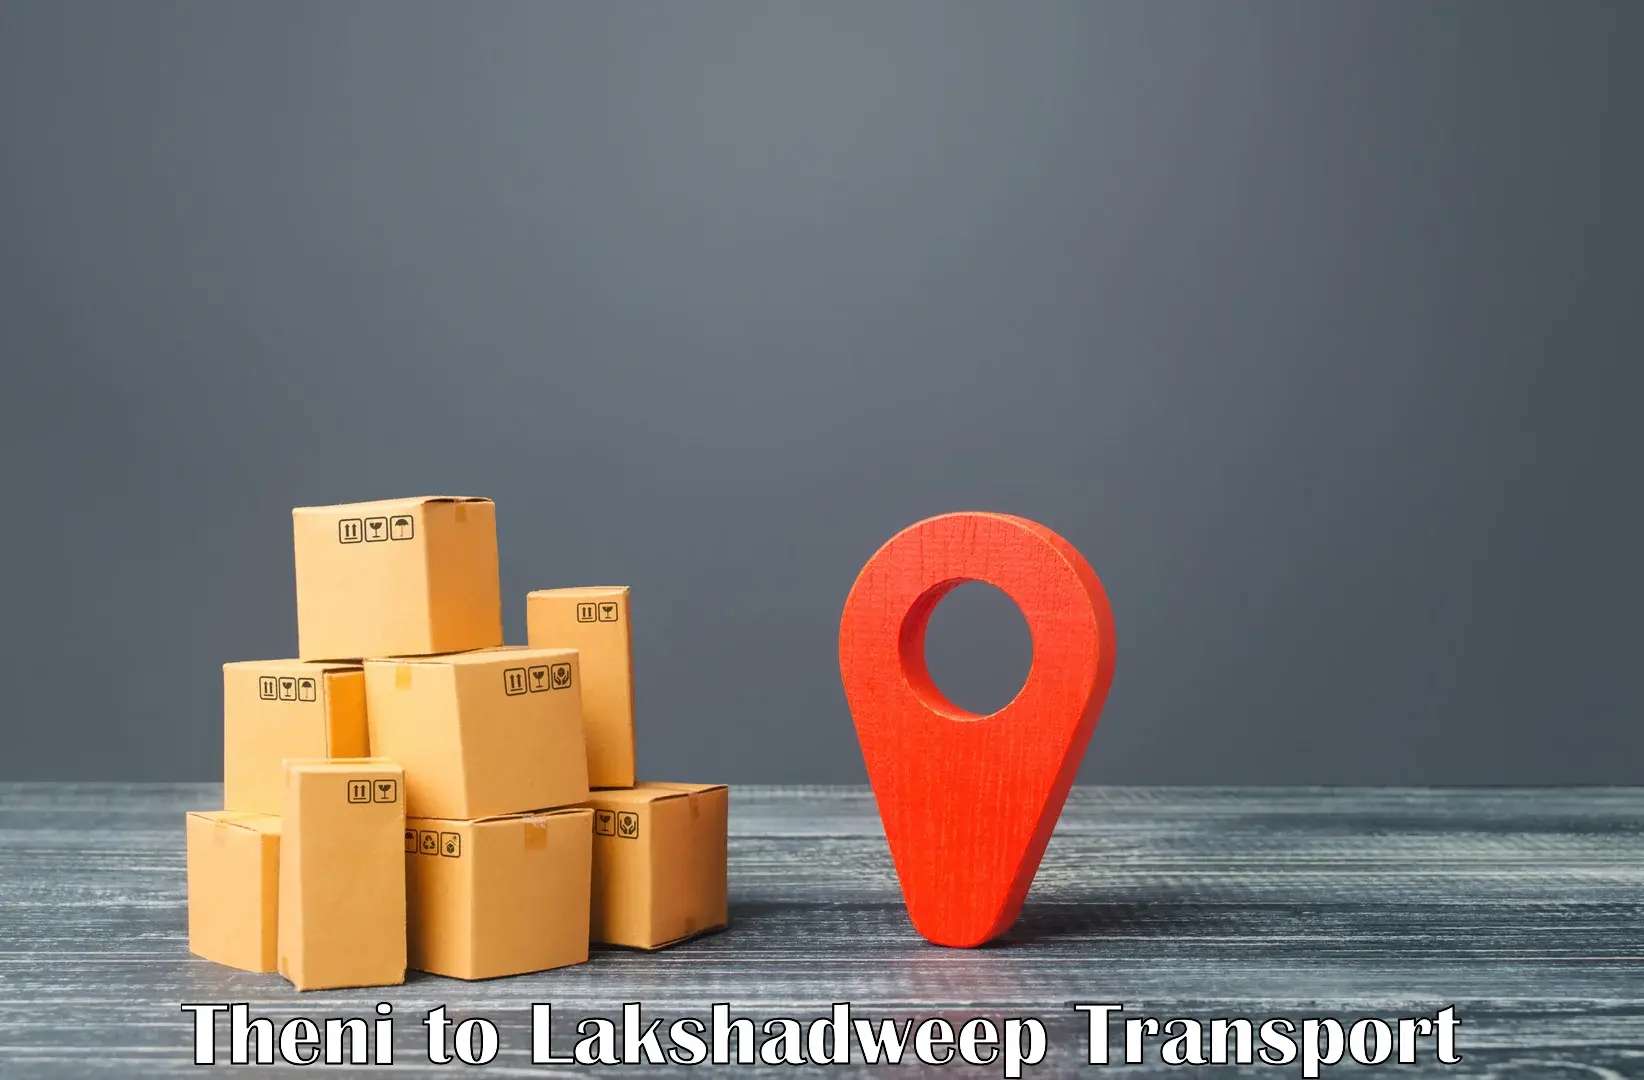 Two wheeler transport services Theni to Lakshadweep